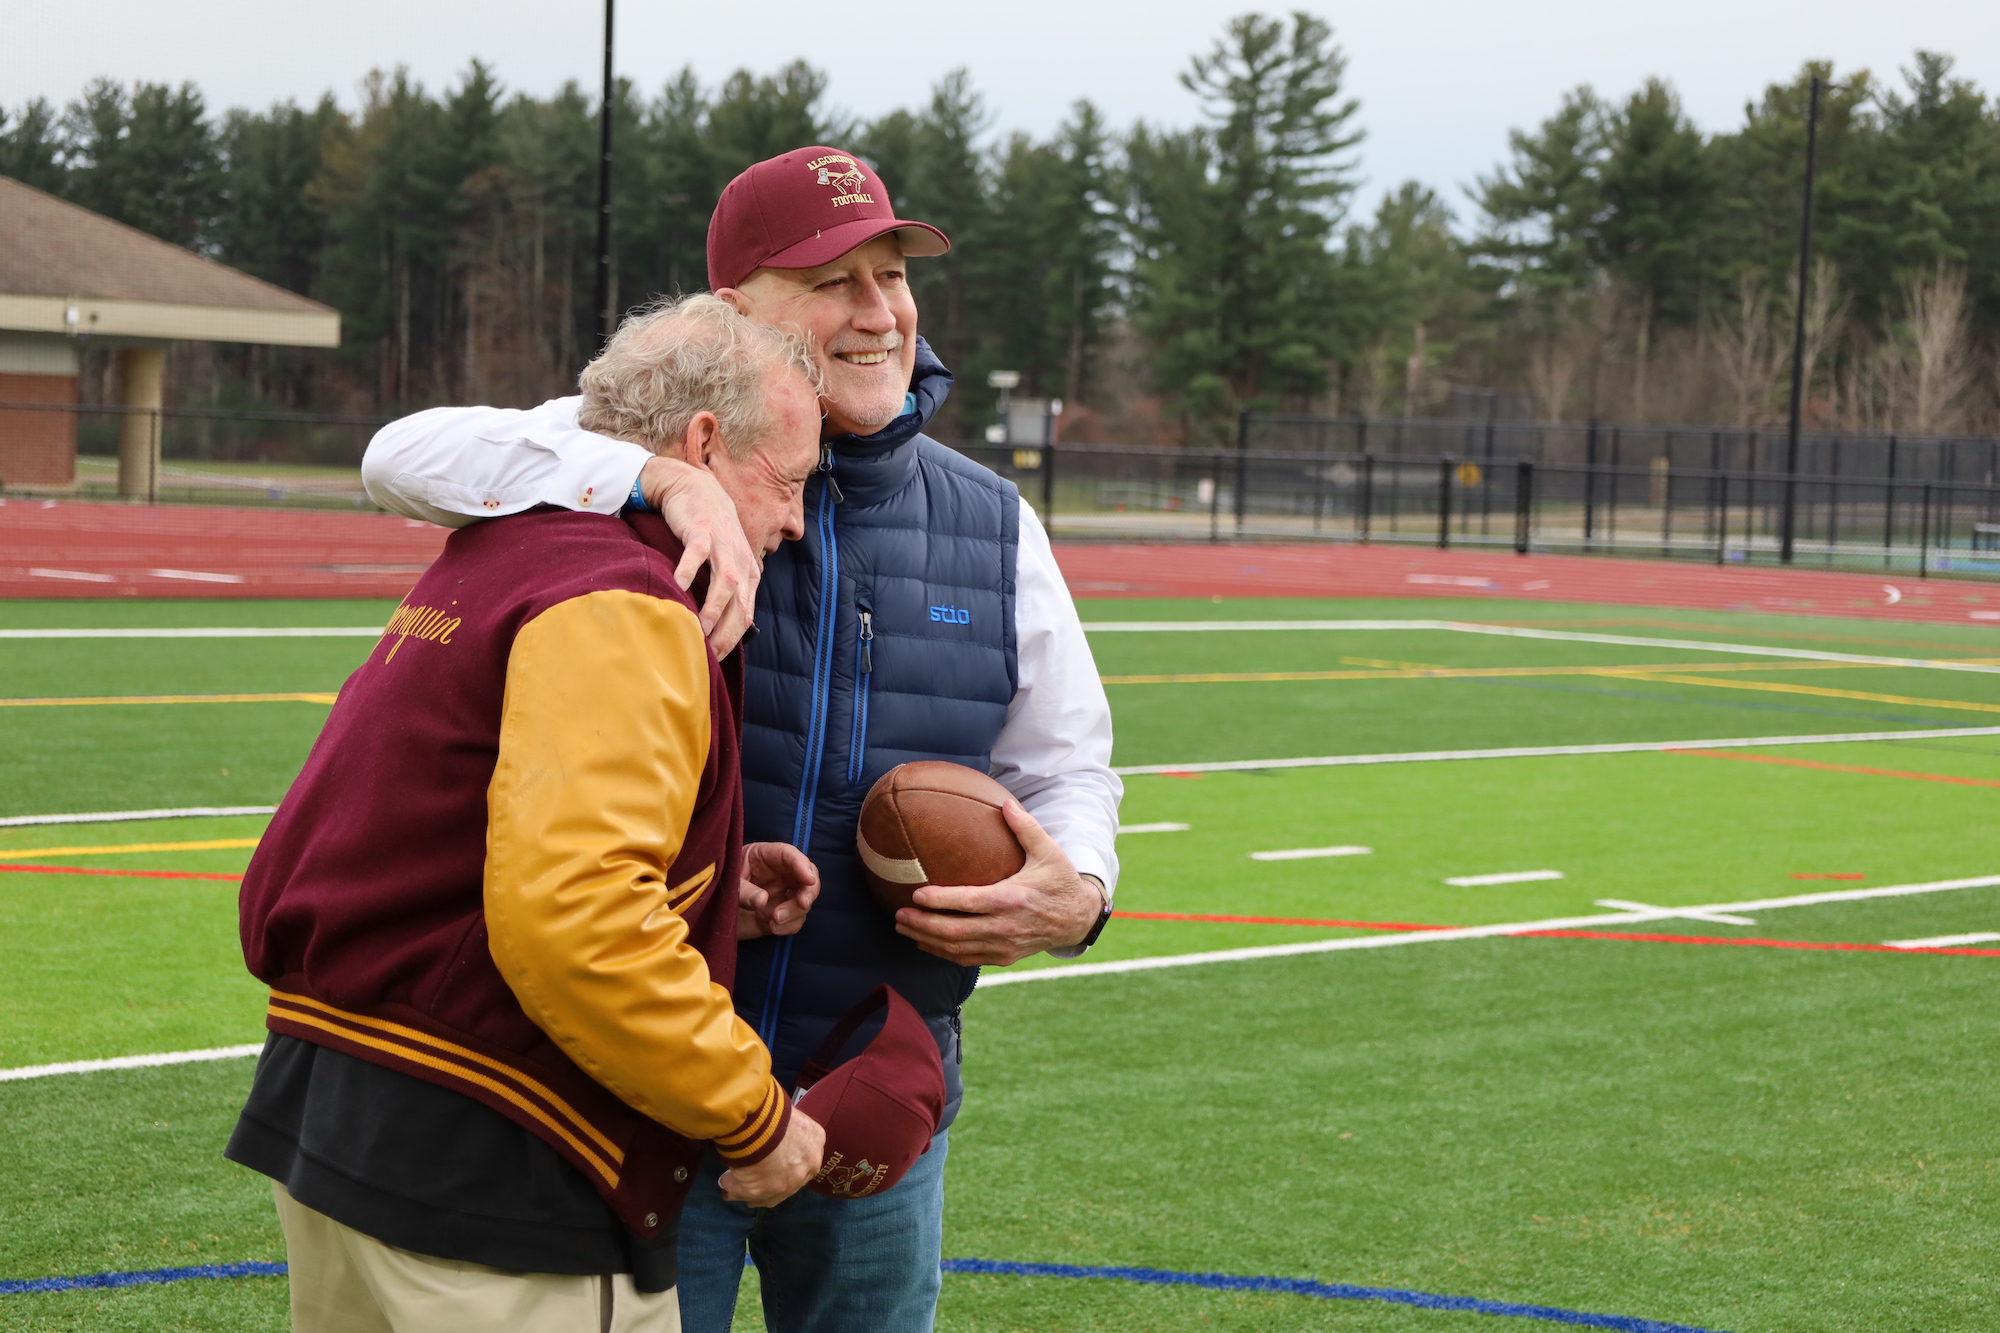 Championship-winning football team reunites at Algonquin after 50 years